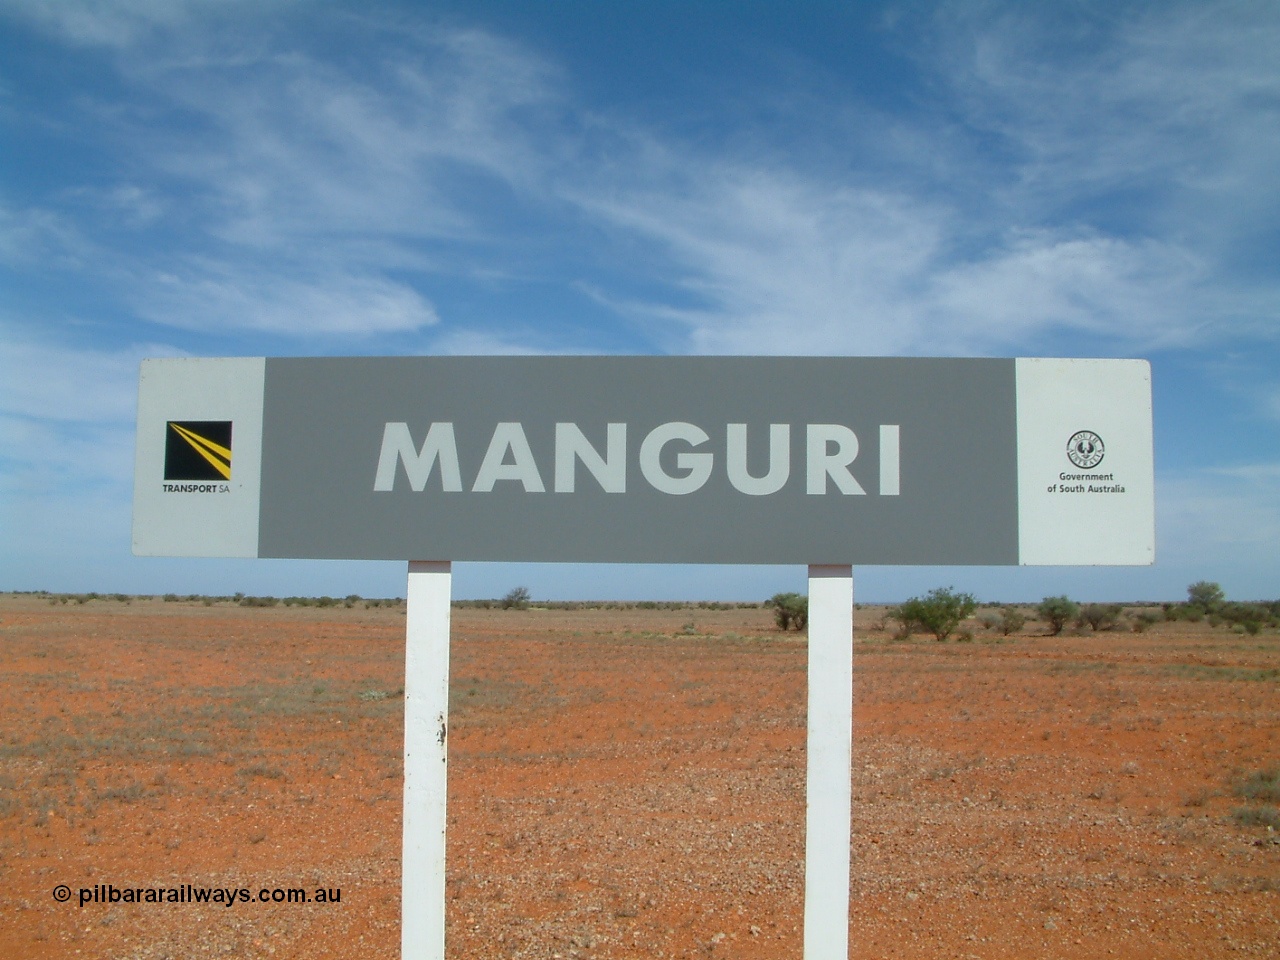 030416 110228
Manguri Siding station nameboard, located 706.5 km from the 0 datum at Coonamia and 200 km north of Tarcoola between Wirrida and Cadney Park on the Tarcoola - Alice Springs line. 16th April 2003.
